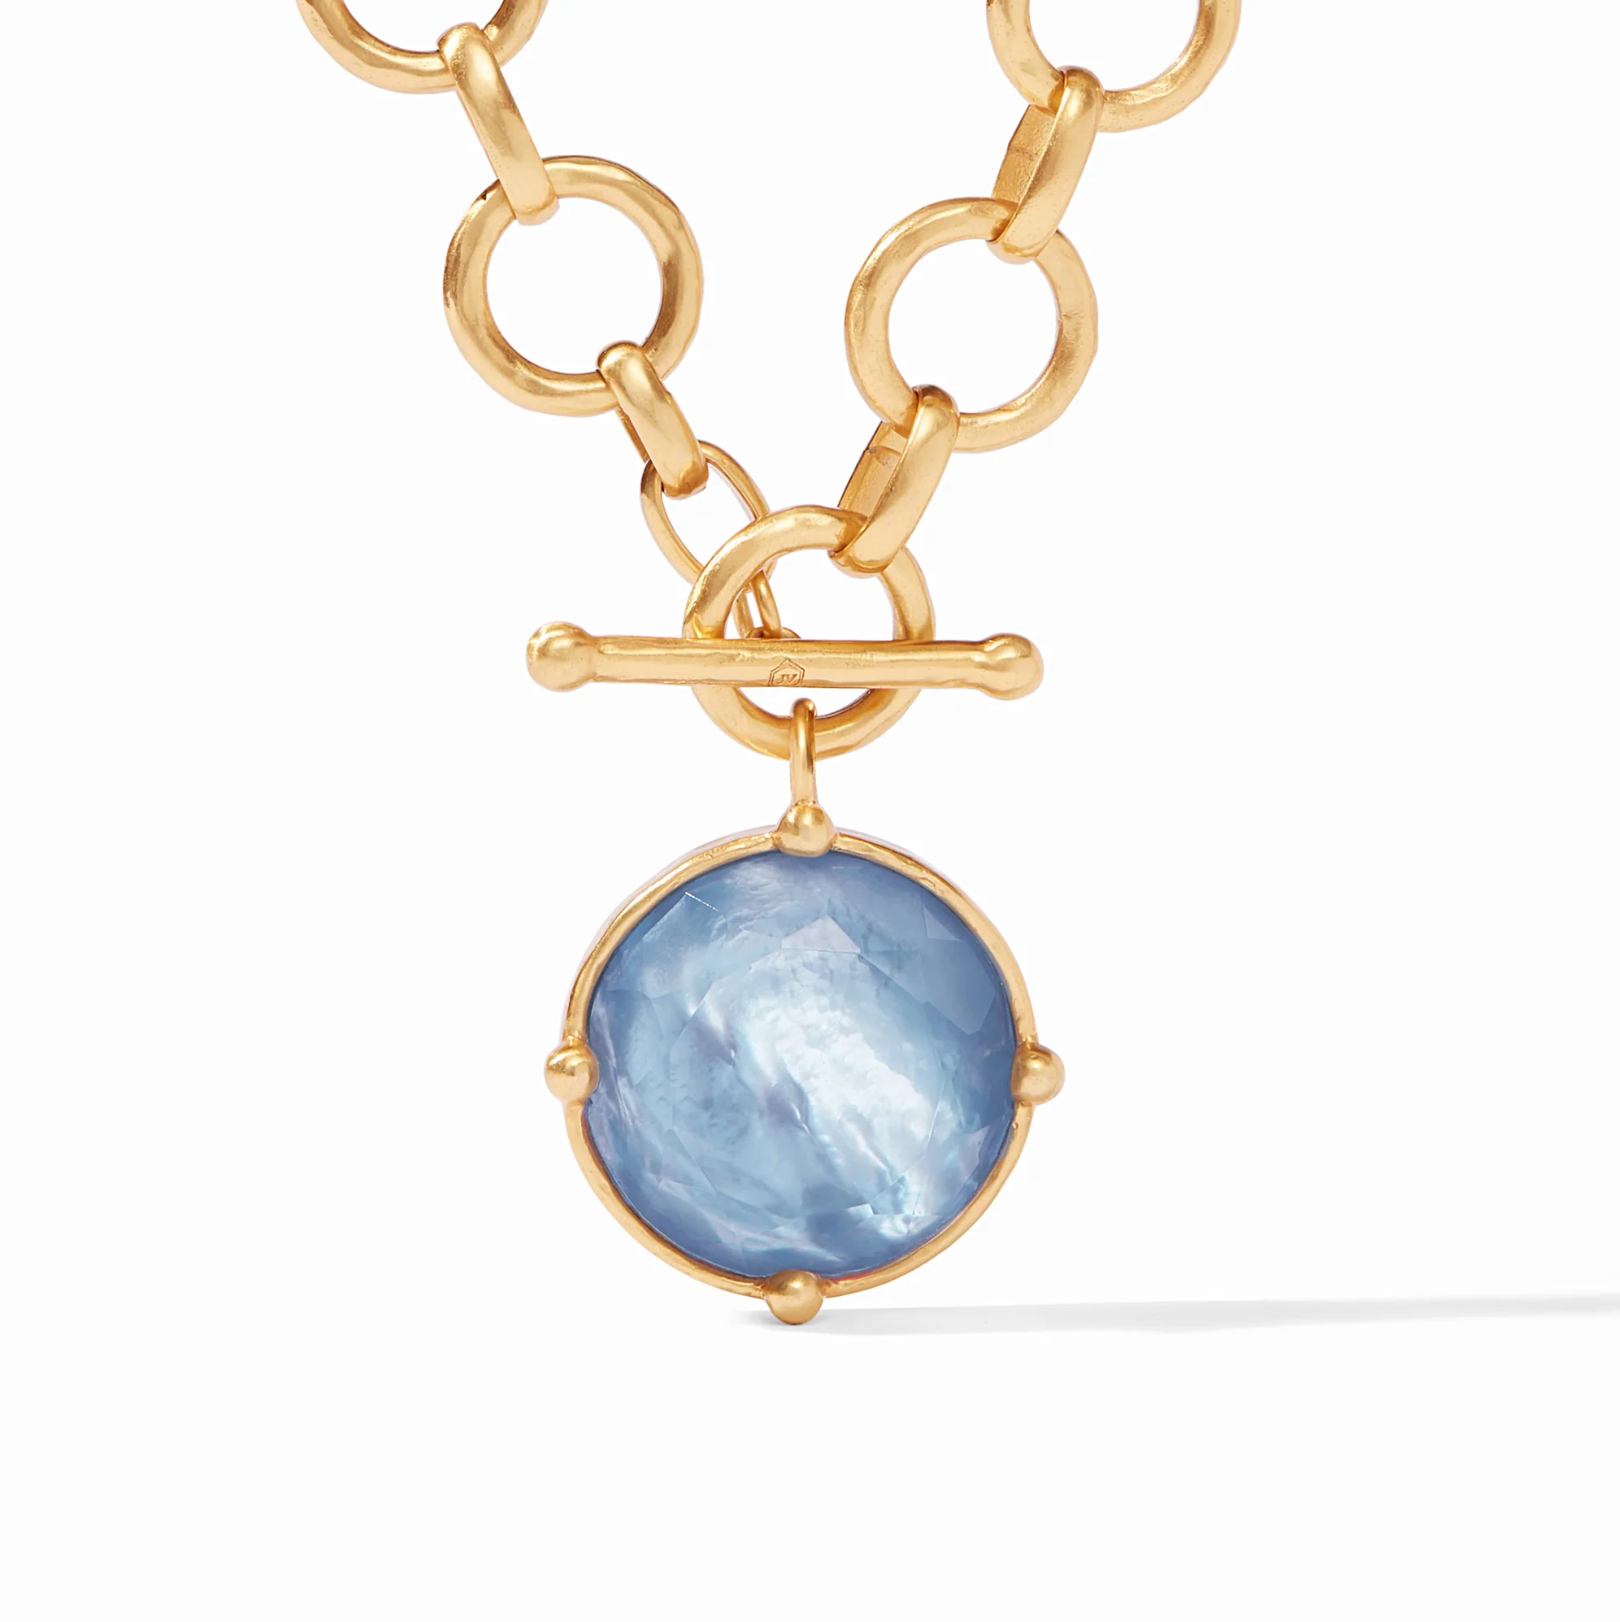 Honeybee Statement in Iridescent Chalcedony Blue - The French Shoppe